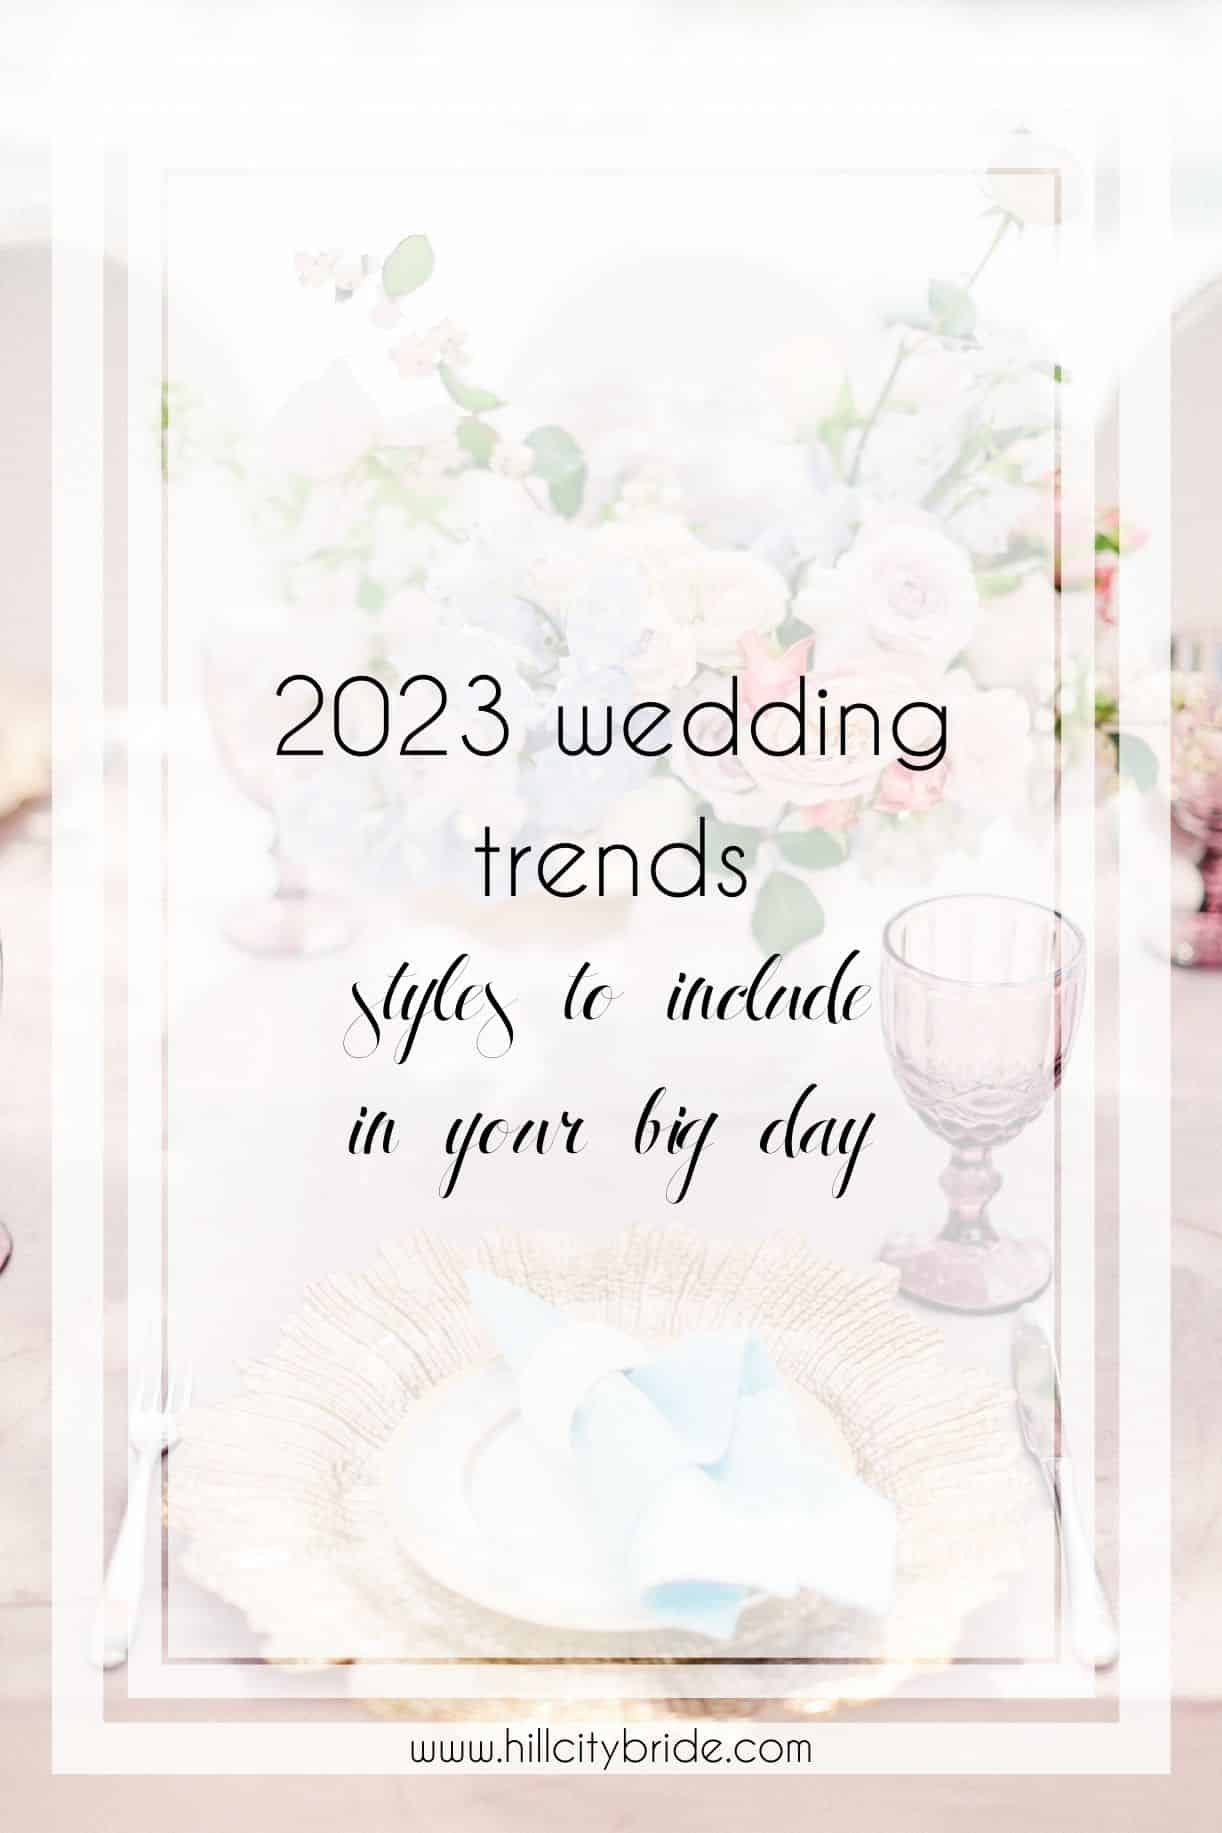 10 Fabulous 2023 Wedding Trends to Try on Your Big Day